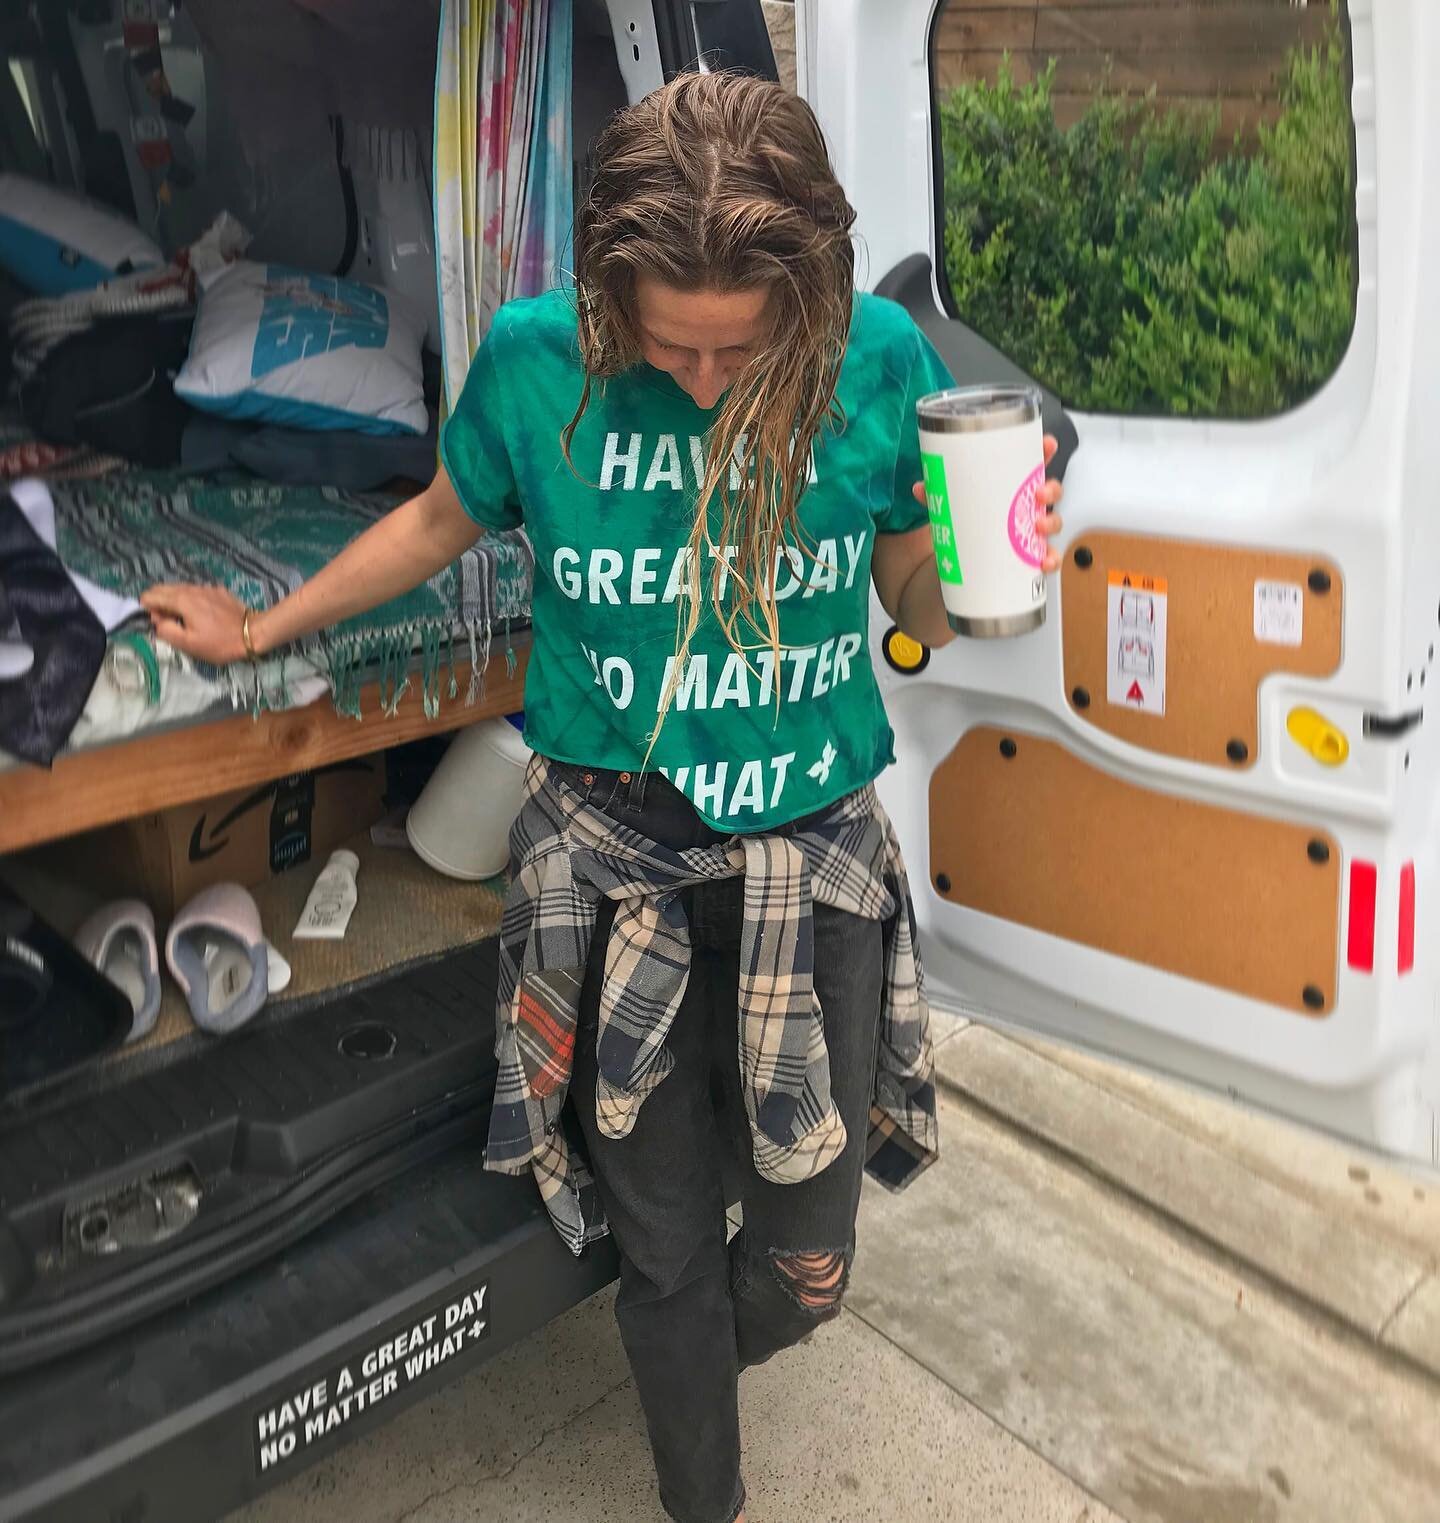 Starting the week our right&hellip;.

Quick surf + Fresh No Matter What Tee = A Great Day 💚

#themindseyeway #handmadewithlove #tiedye #tee #mantra #greatday #vanlife #surf #haveagreatdaynomatterwhat